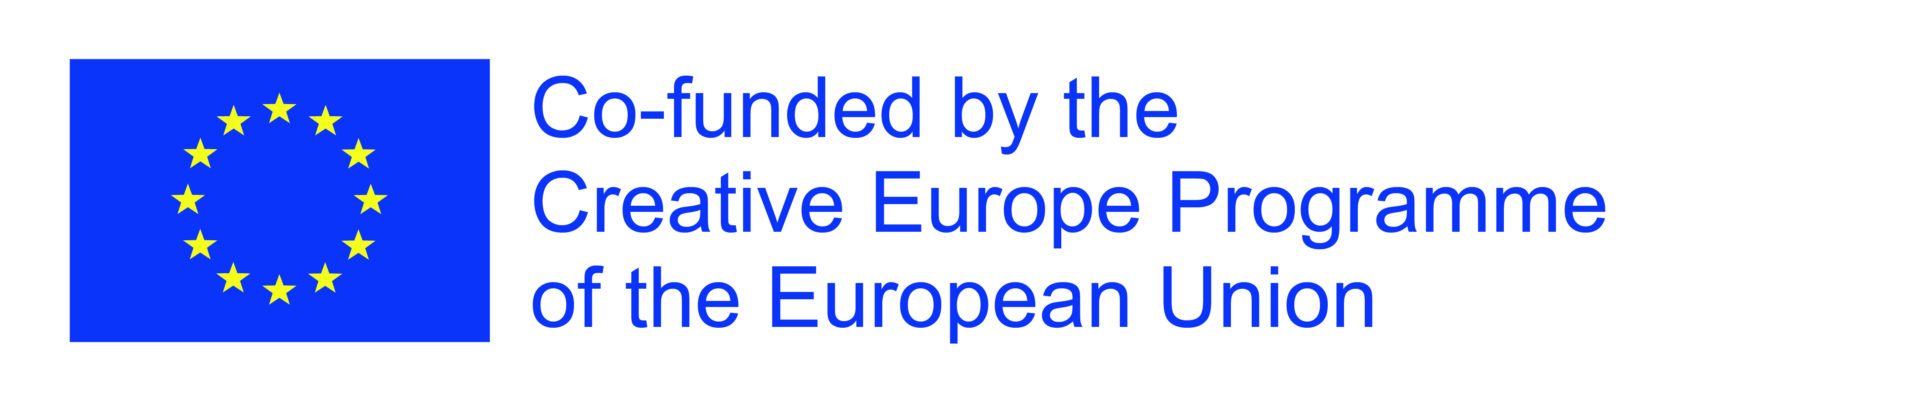 CO-funded by the Creative Europe Programme of European Union